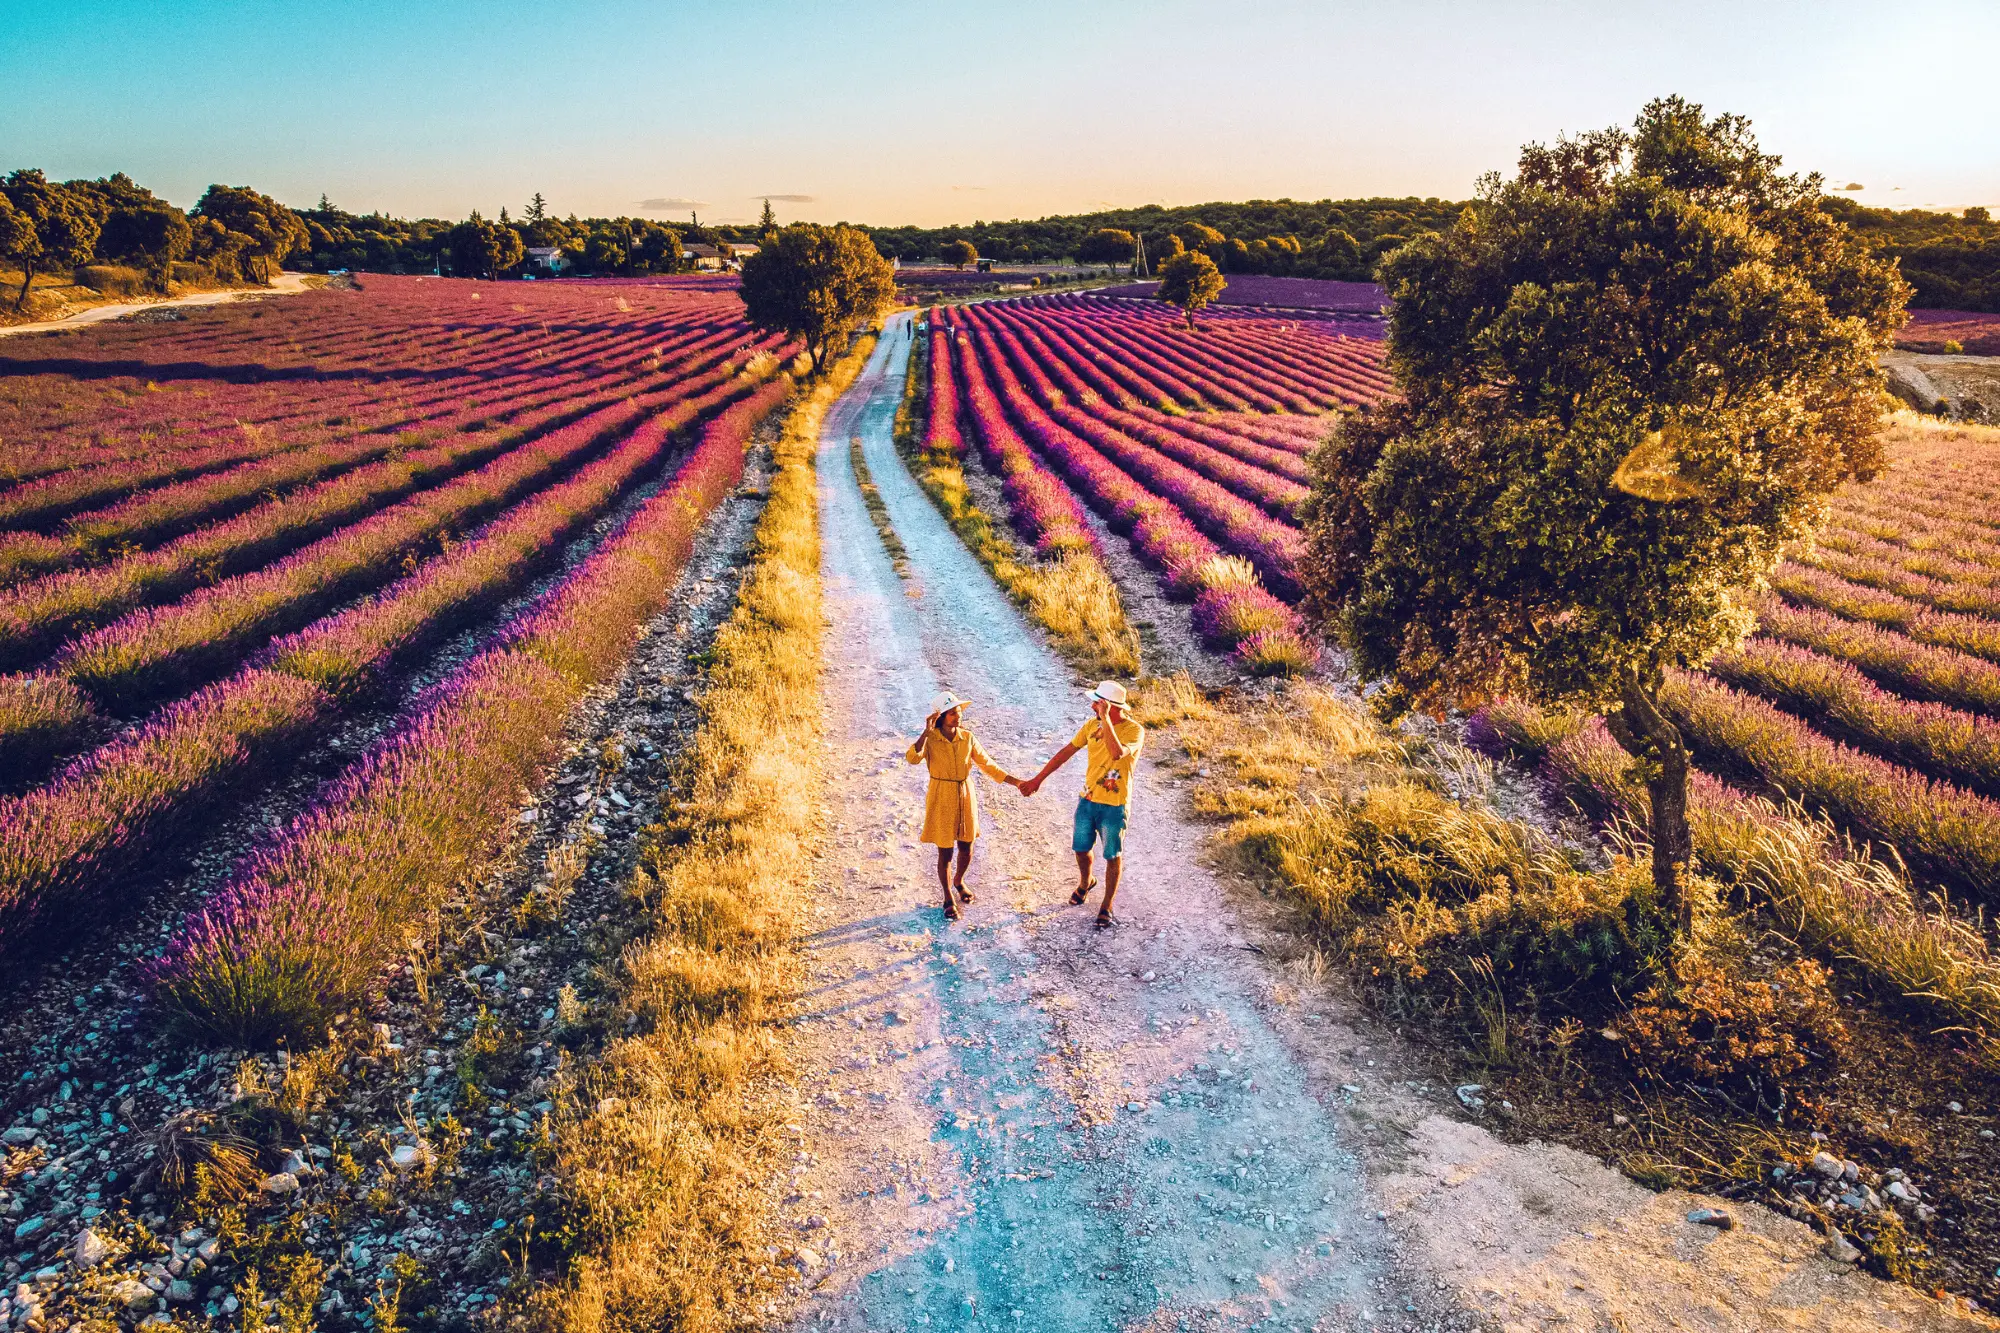 lavender fields in provence